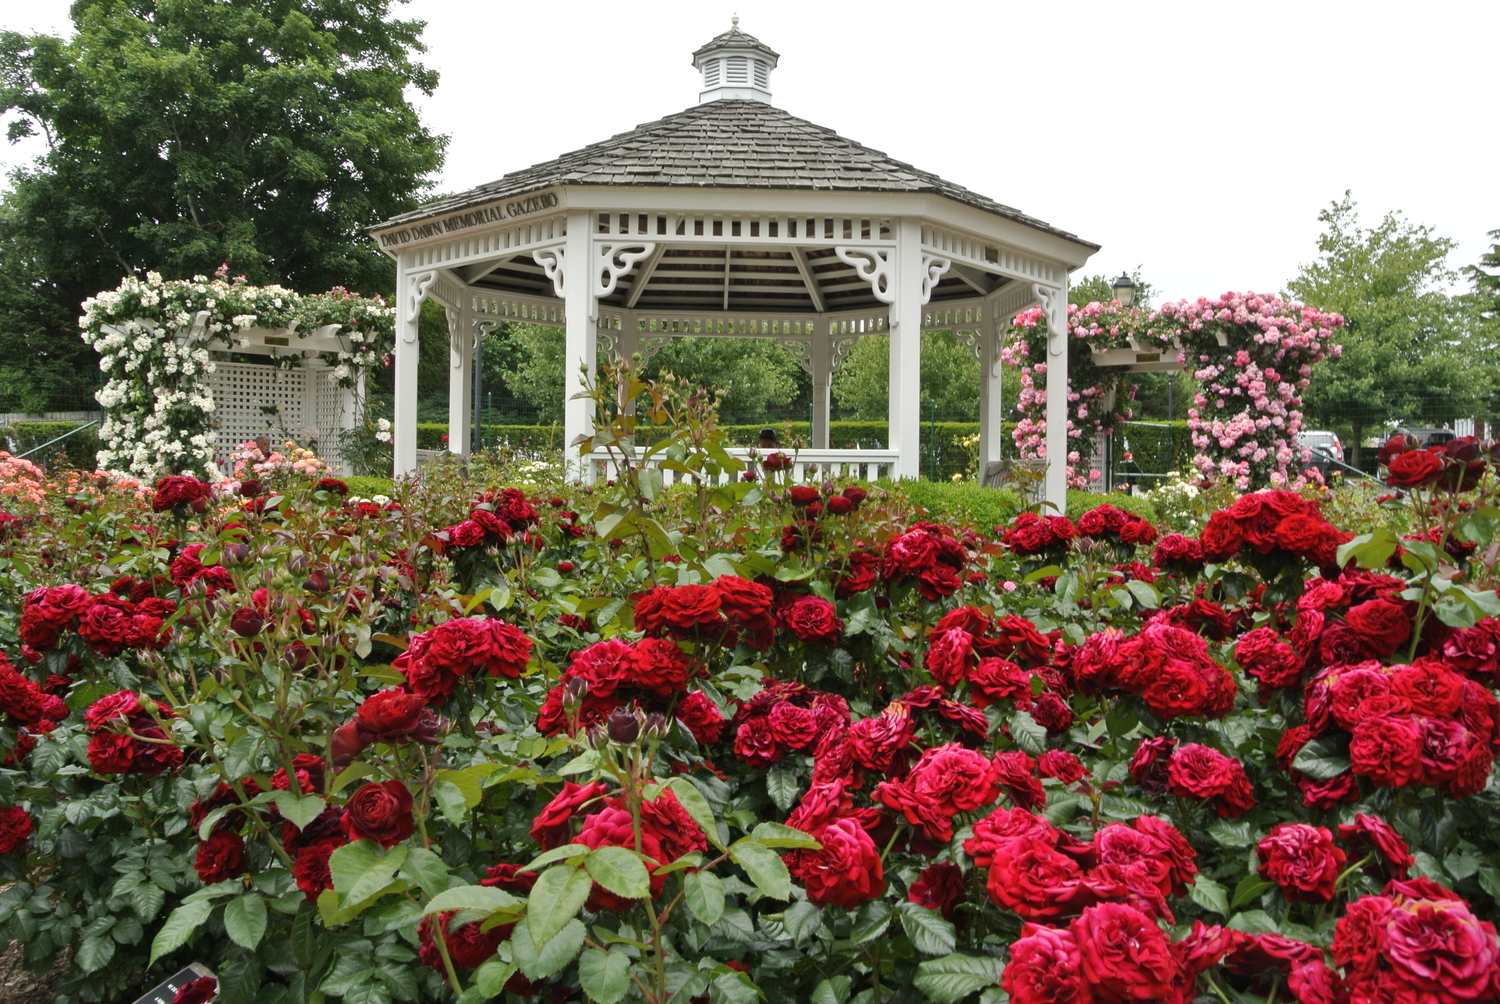 One of the crown jewels of the Southampton Rose Society is the garden at the Rogers Memorial Library. DANA SHAW